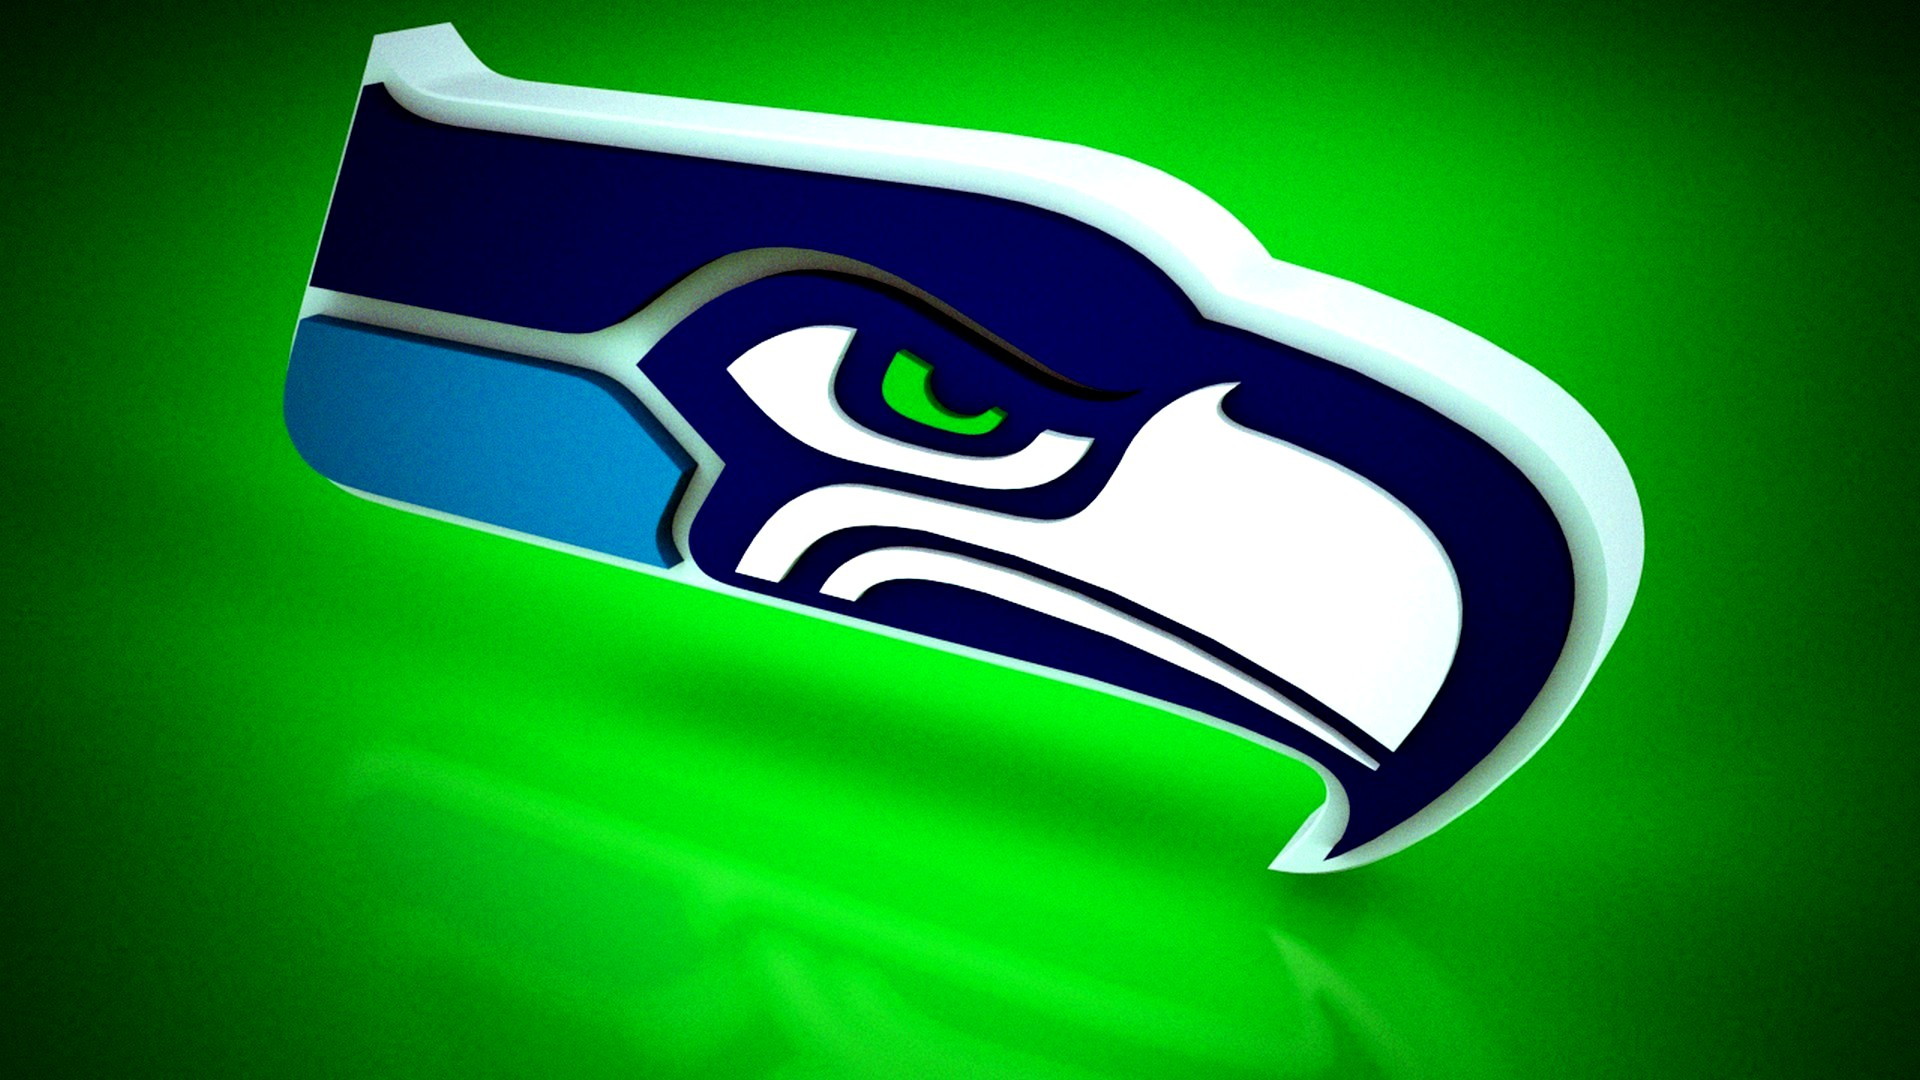 Seattle Seahawks Logo Wallpaper For Desktop with high-resolution 1920x1080 pixel. You can use and set as wallpaper for Notebook Screensavers, Mac Wallpapers, Mobile Home Screen, iPhone or Android Phones Lock Screen